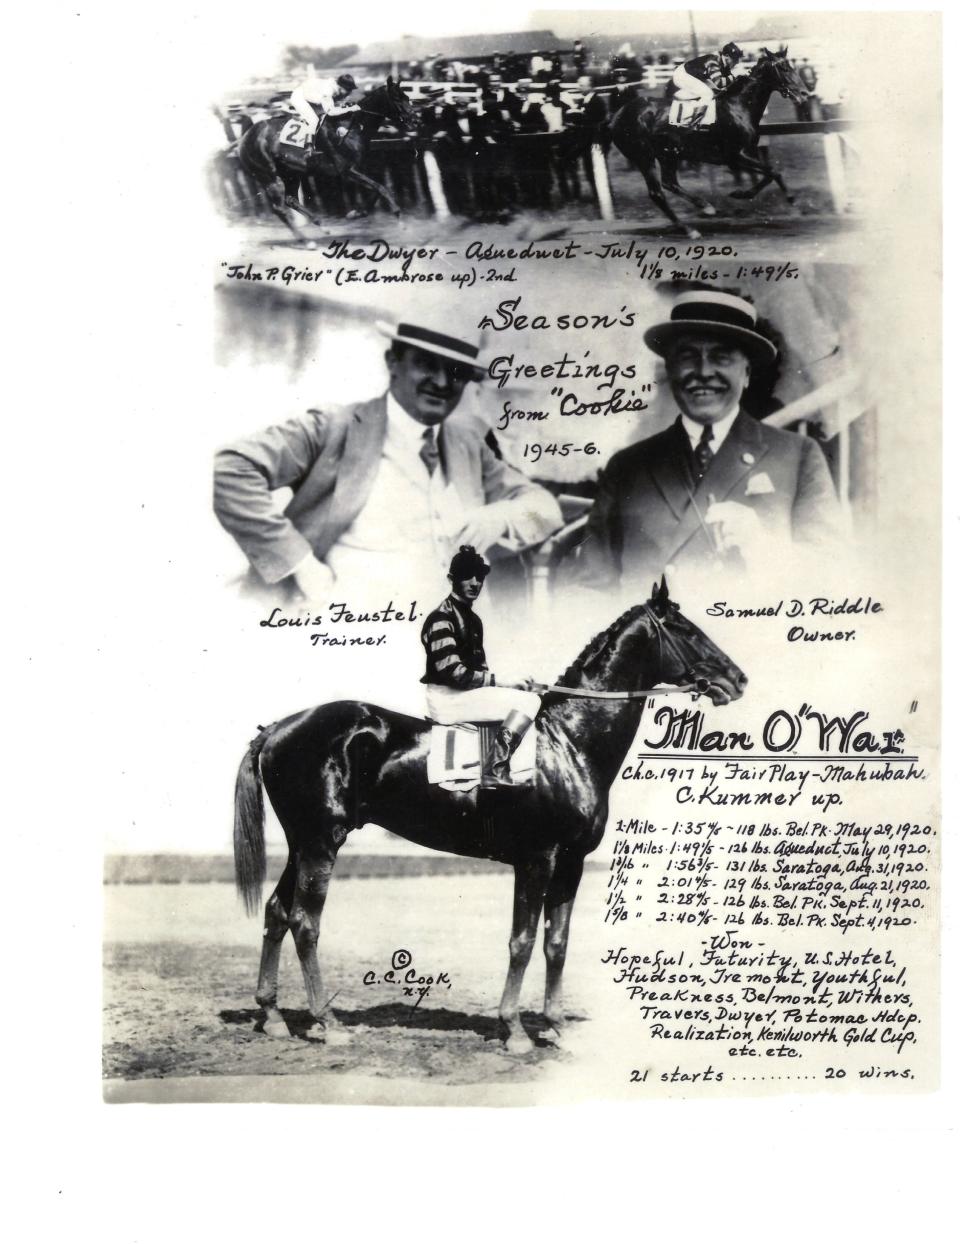 Man O' War and Maryland: One of horse racing's all-time greats is tied ...